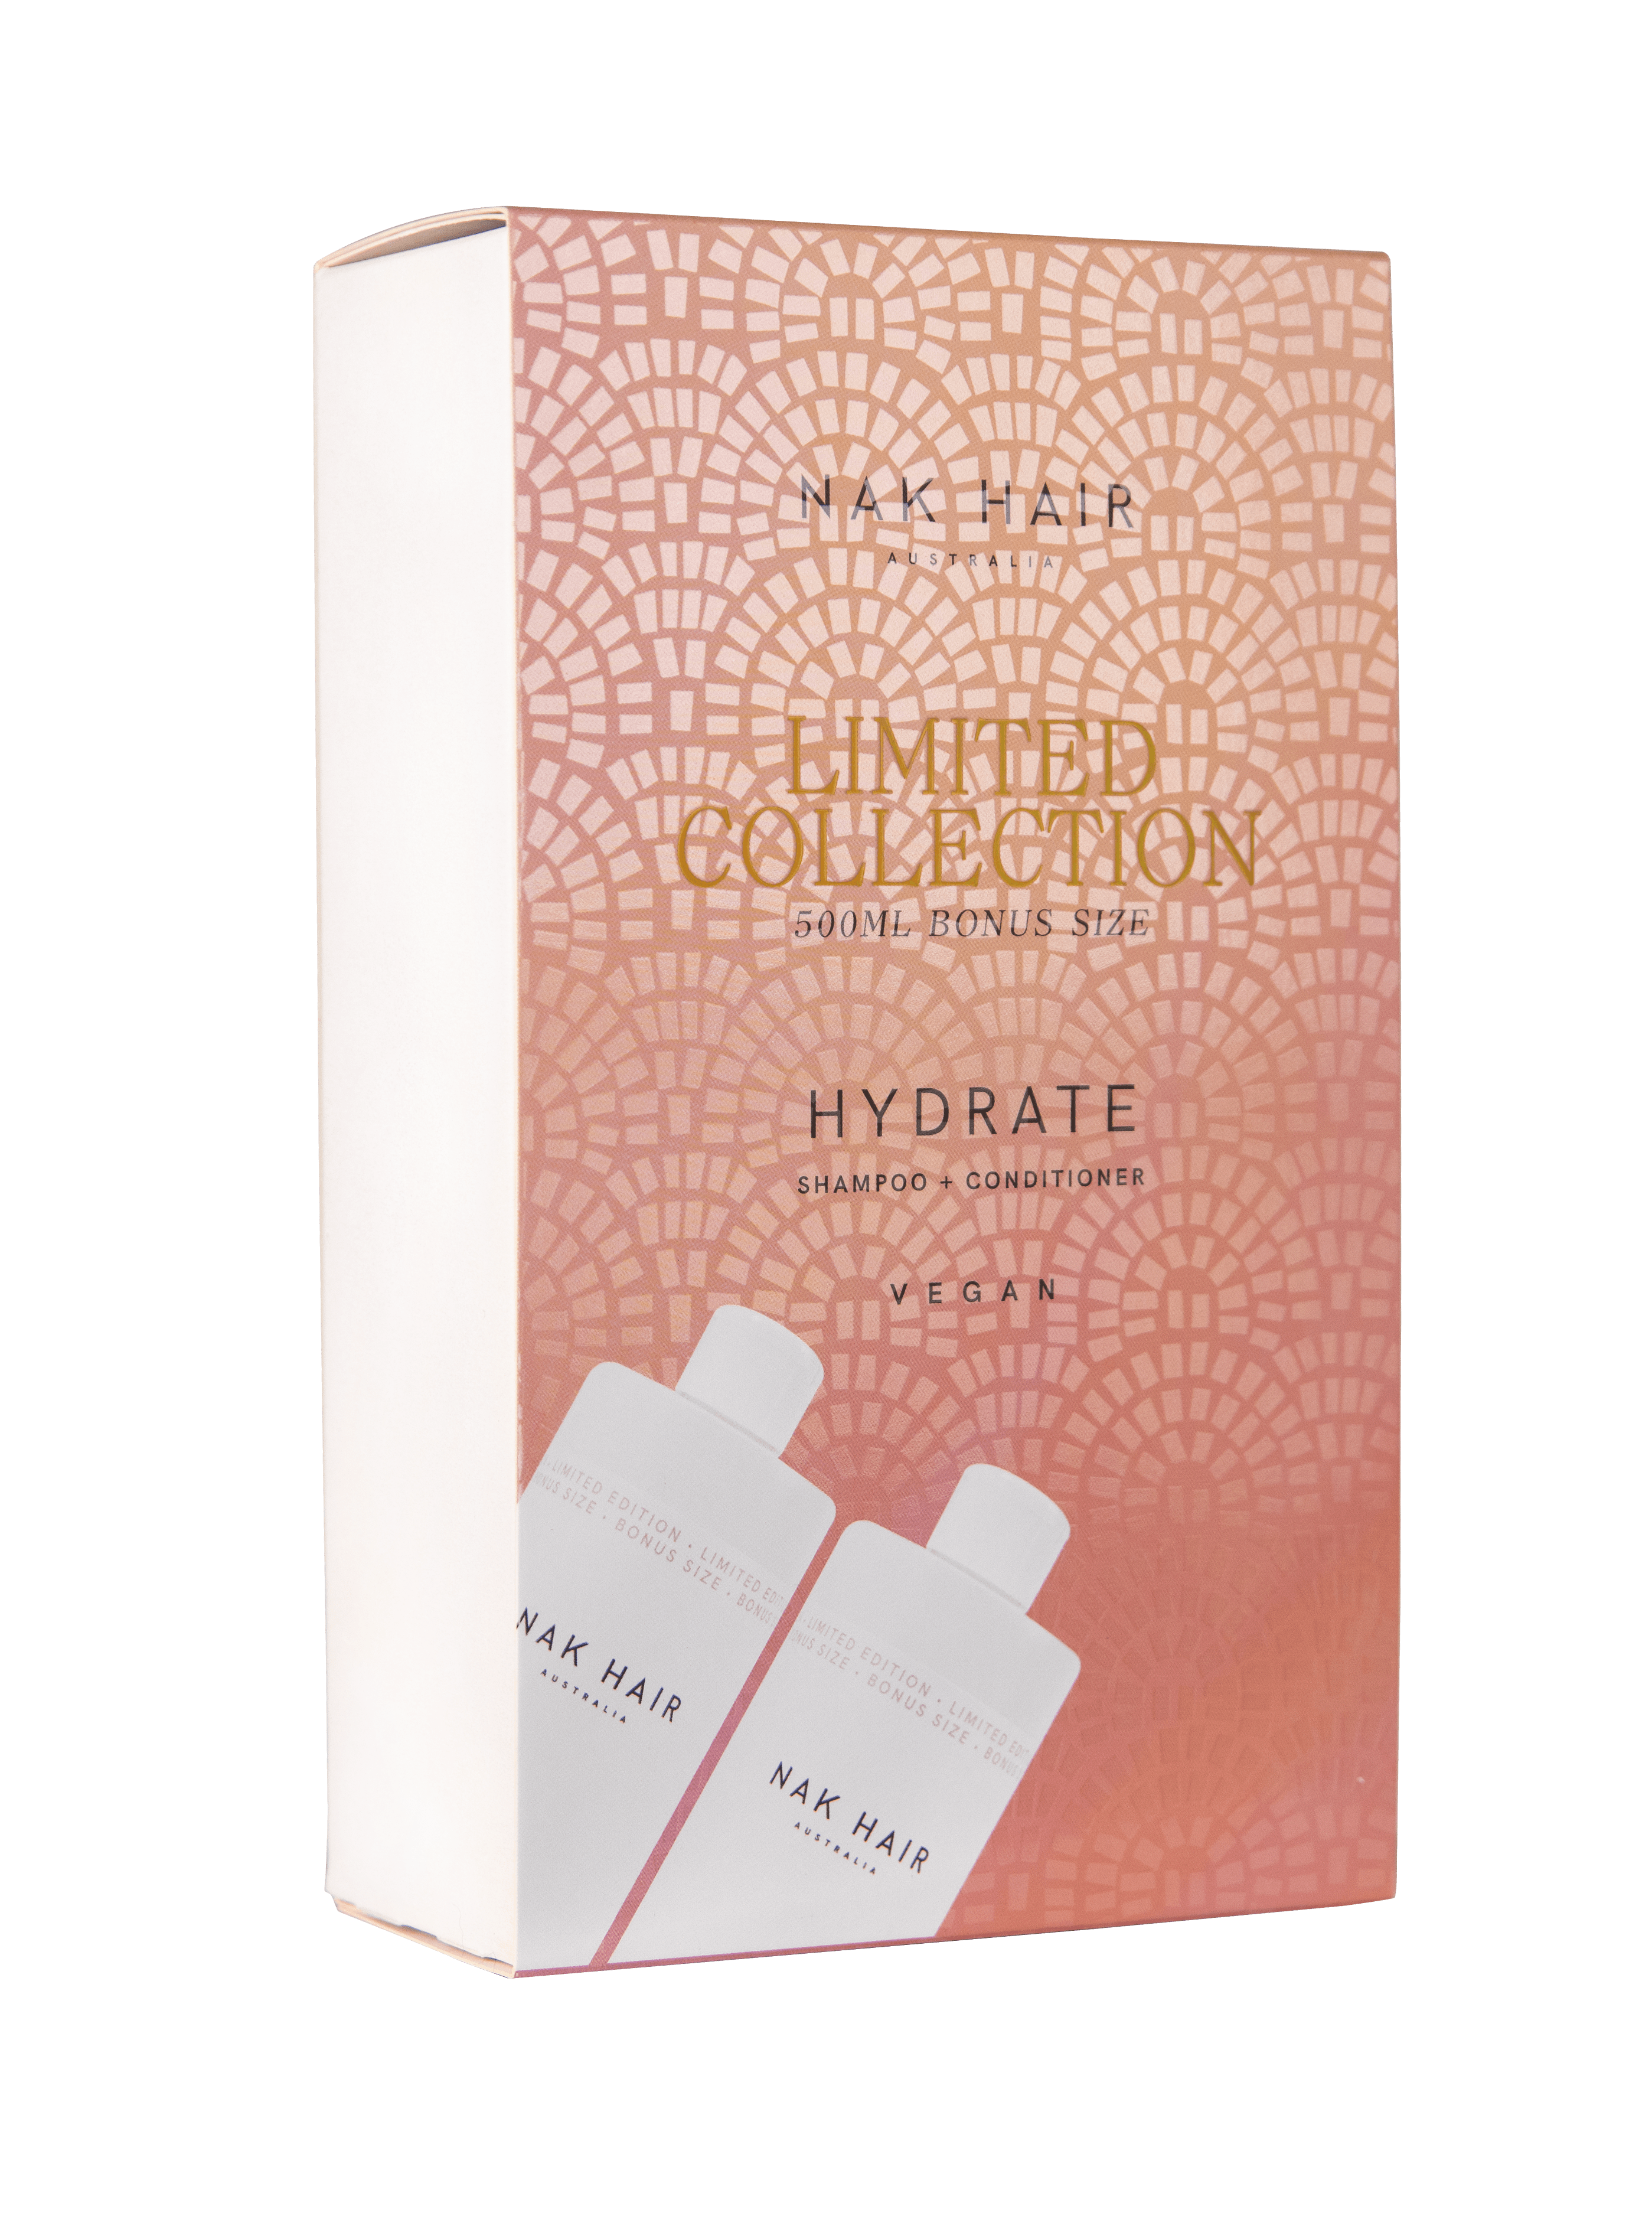 Nak Hydrate Shampoo and Conditioner 500ml Duo Pack